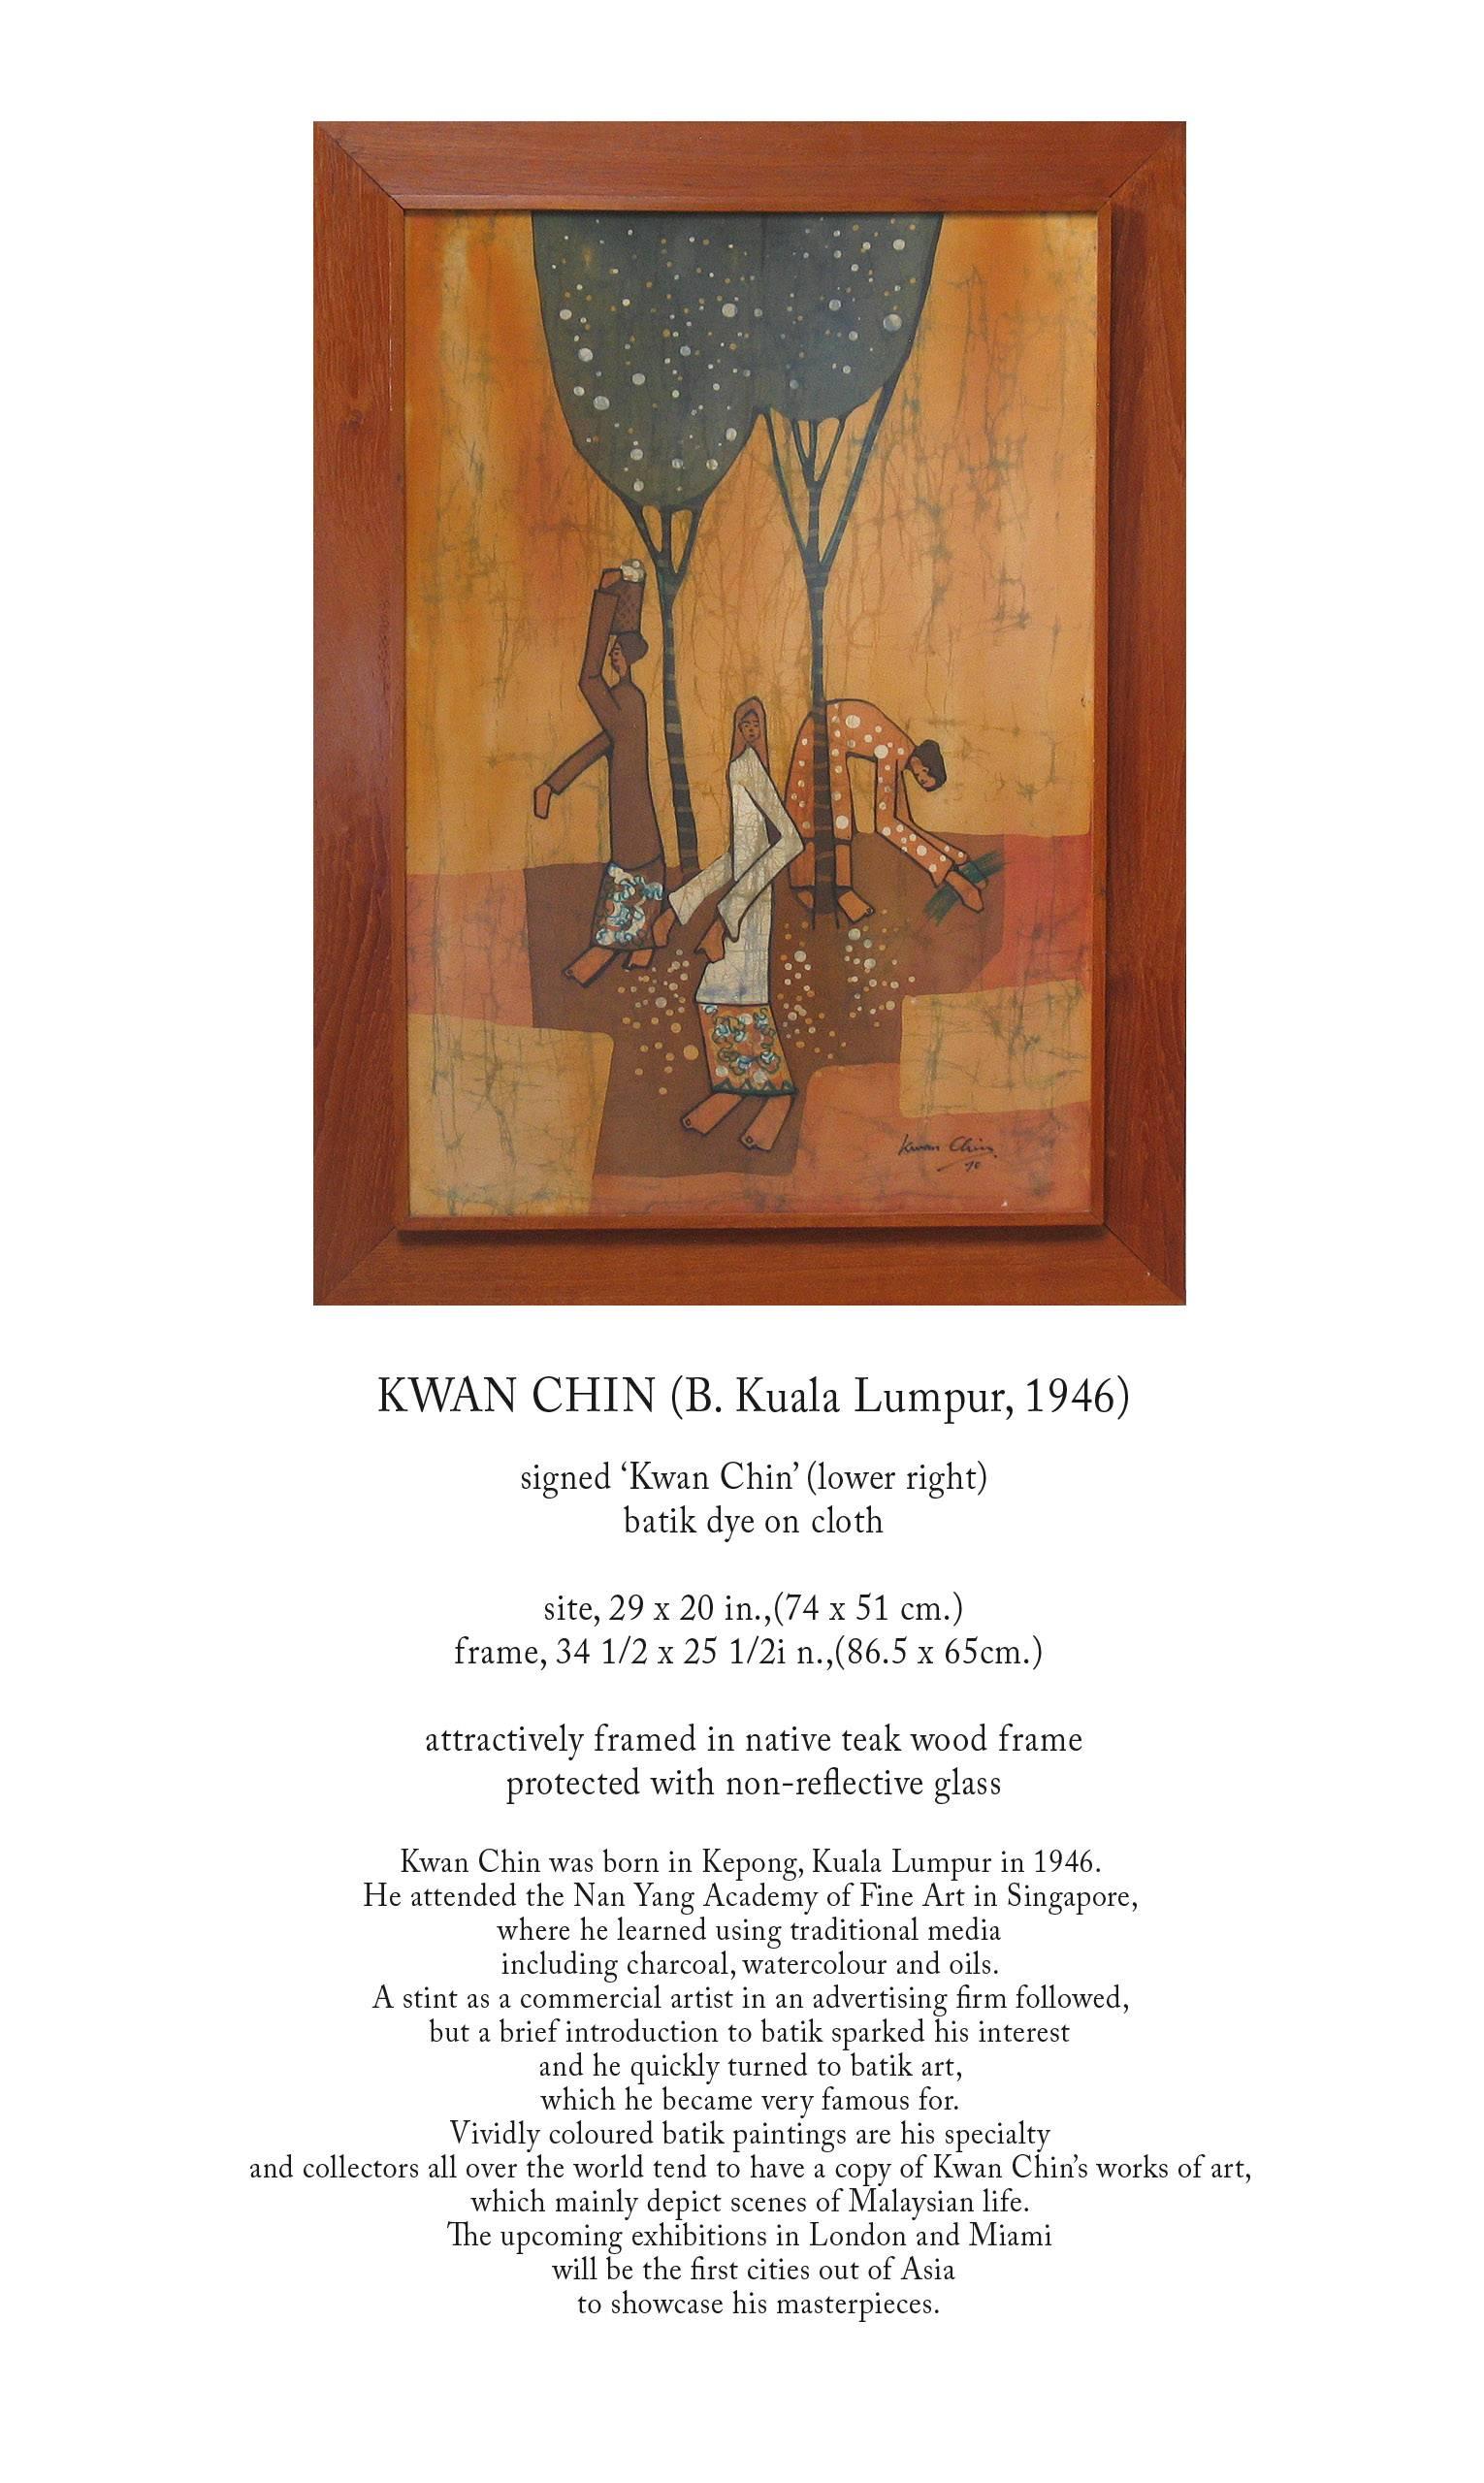 Kwan Chin (B. Kuala Lumpur. 1946) Batik dye on cloth, signed 'Kwan Chin' signed lower right. Attractively framed in native teak wood frame protected with non-reflective glass.
Kwan Chin was born in Kepong, Kuala Lumpur in 1946. He attended the Nan